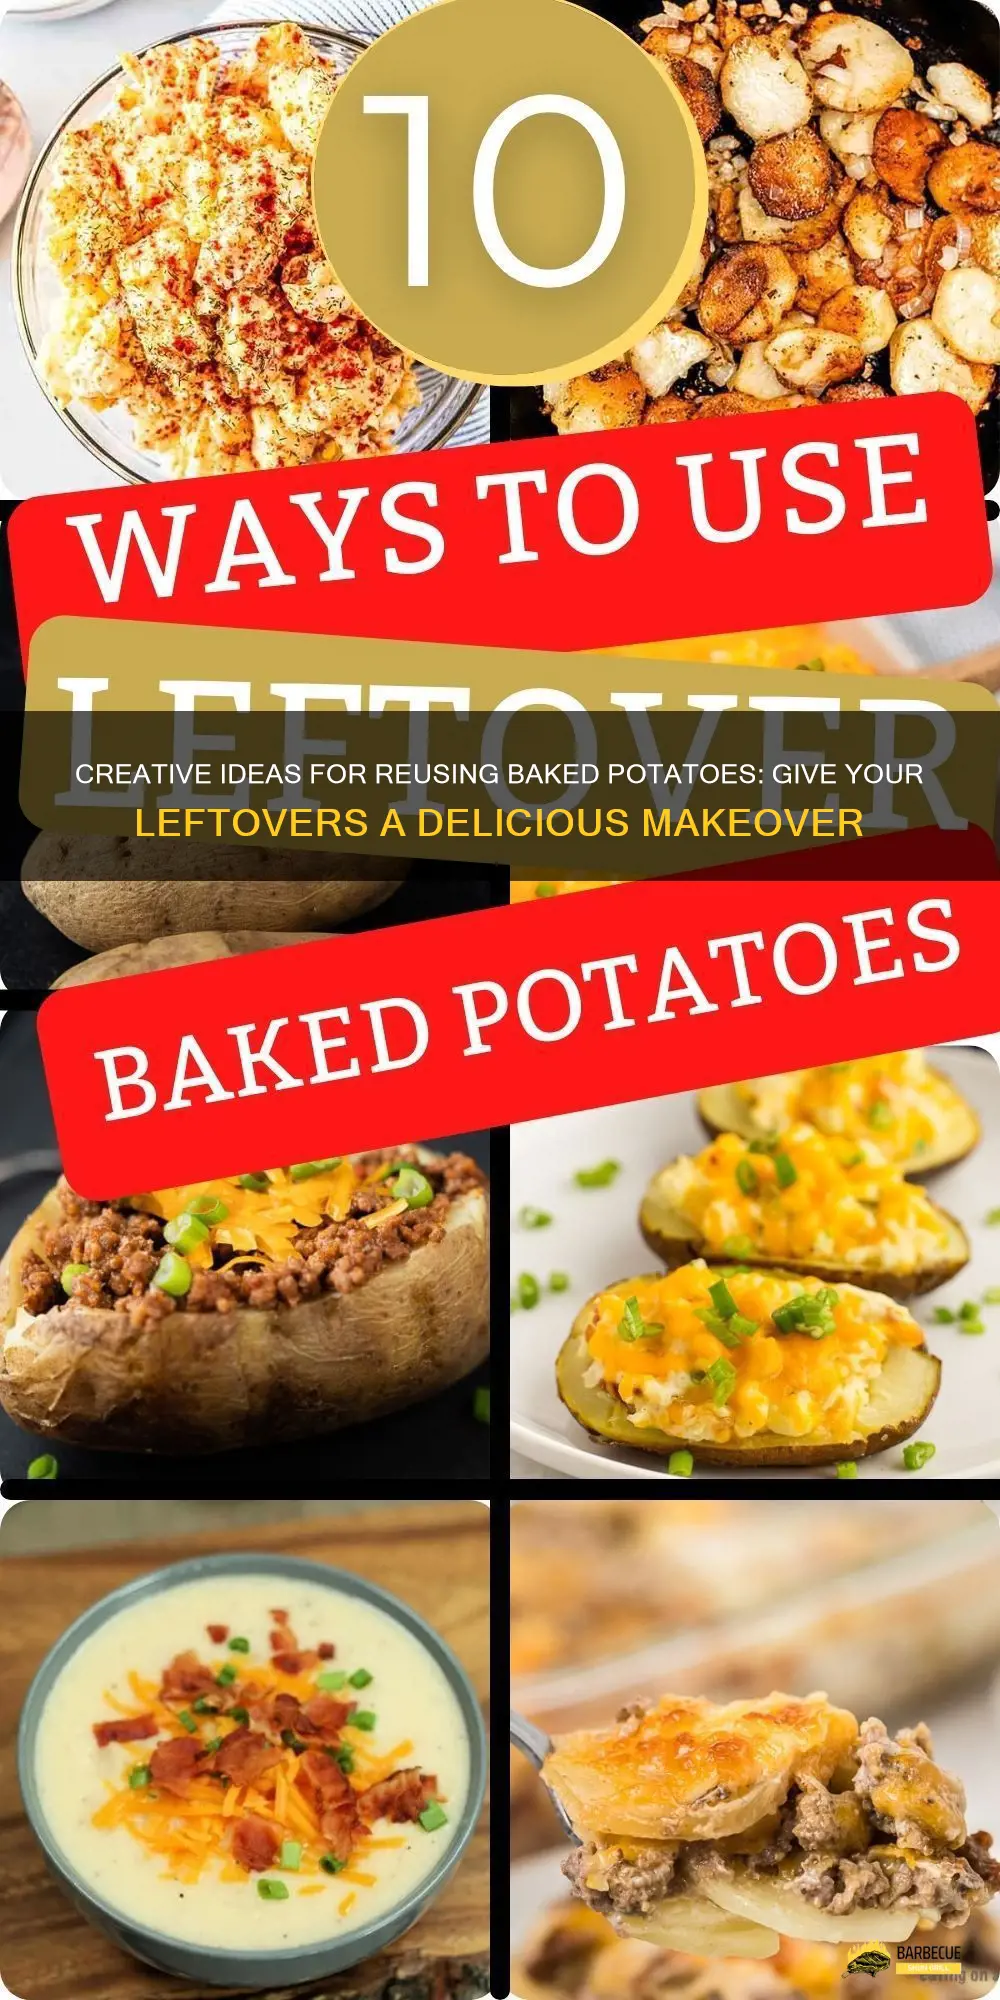 Creative Ideas For Reusing Baked Potatoes: Give Your Leftovers A ...